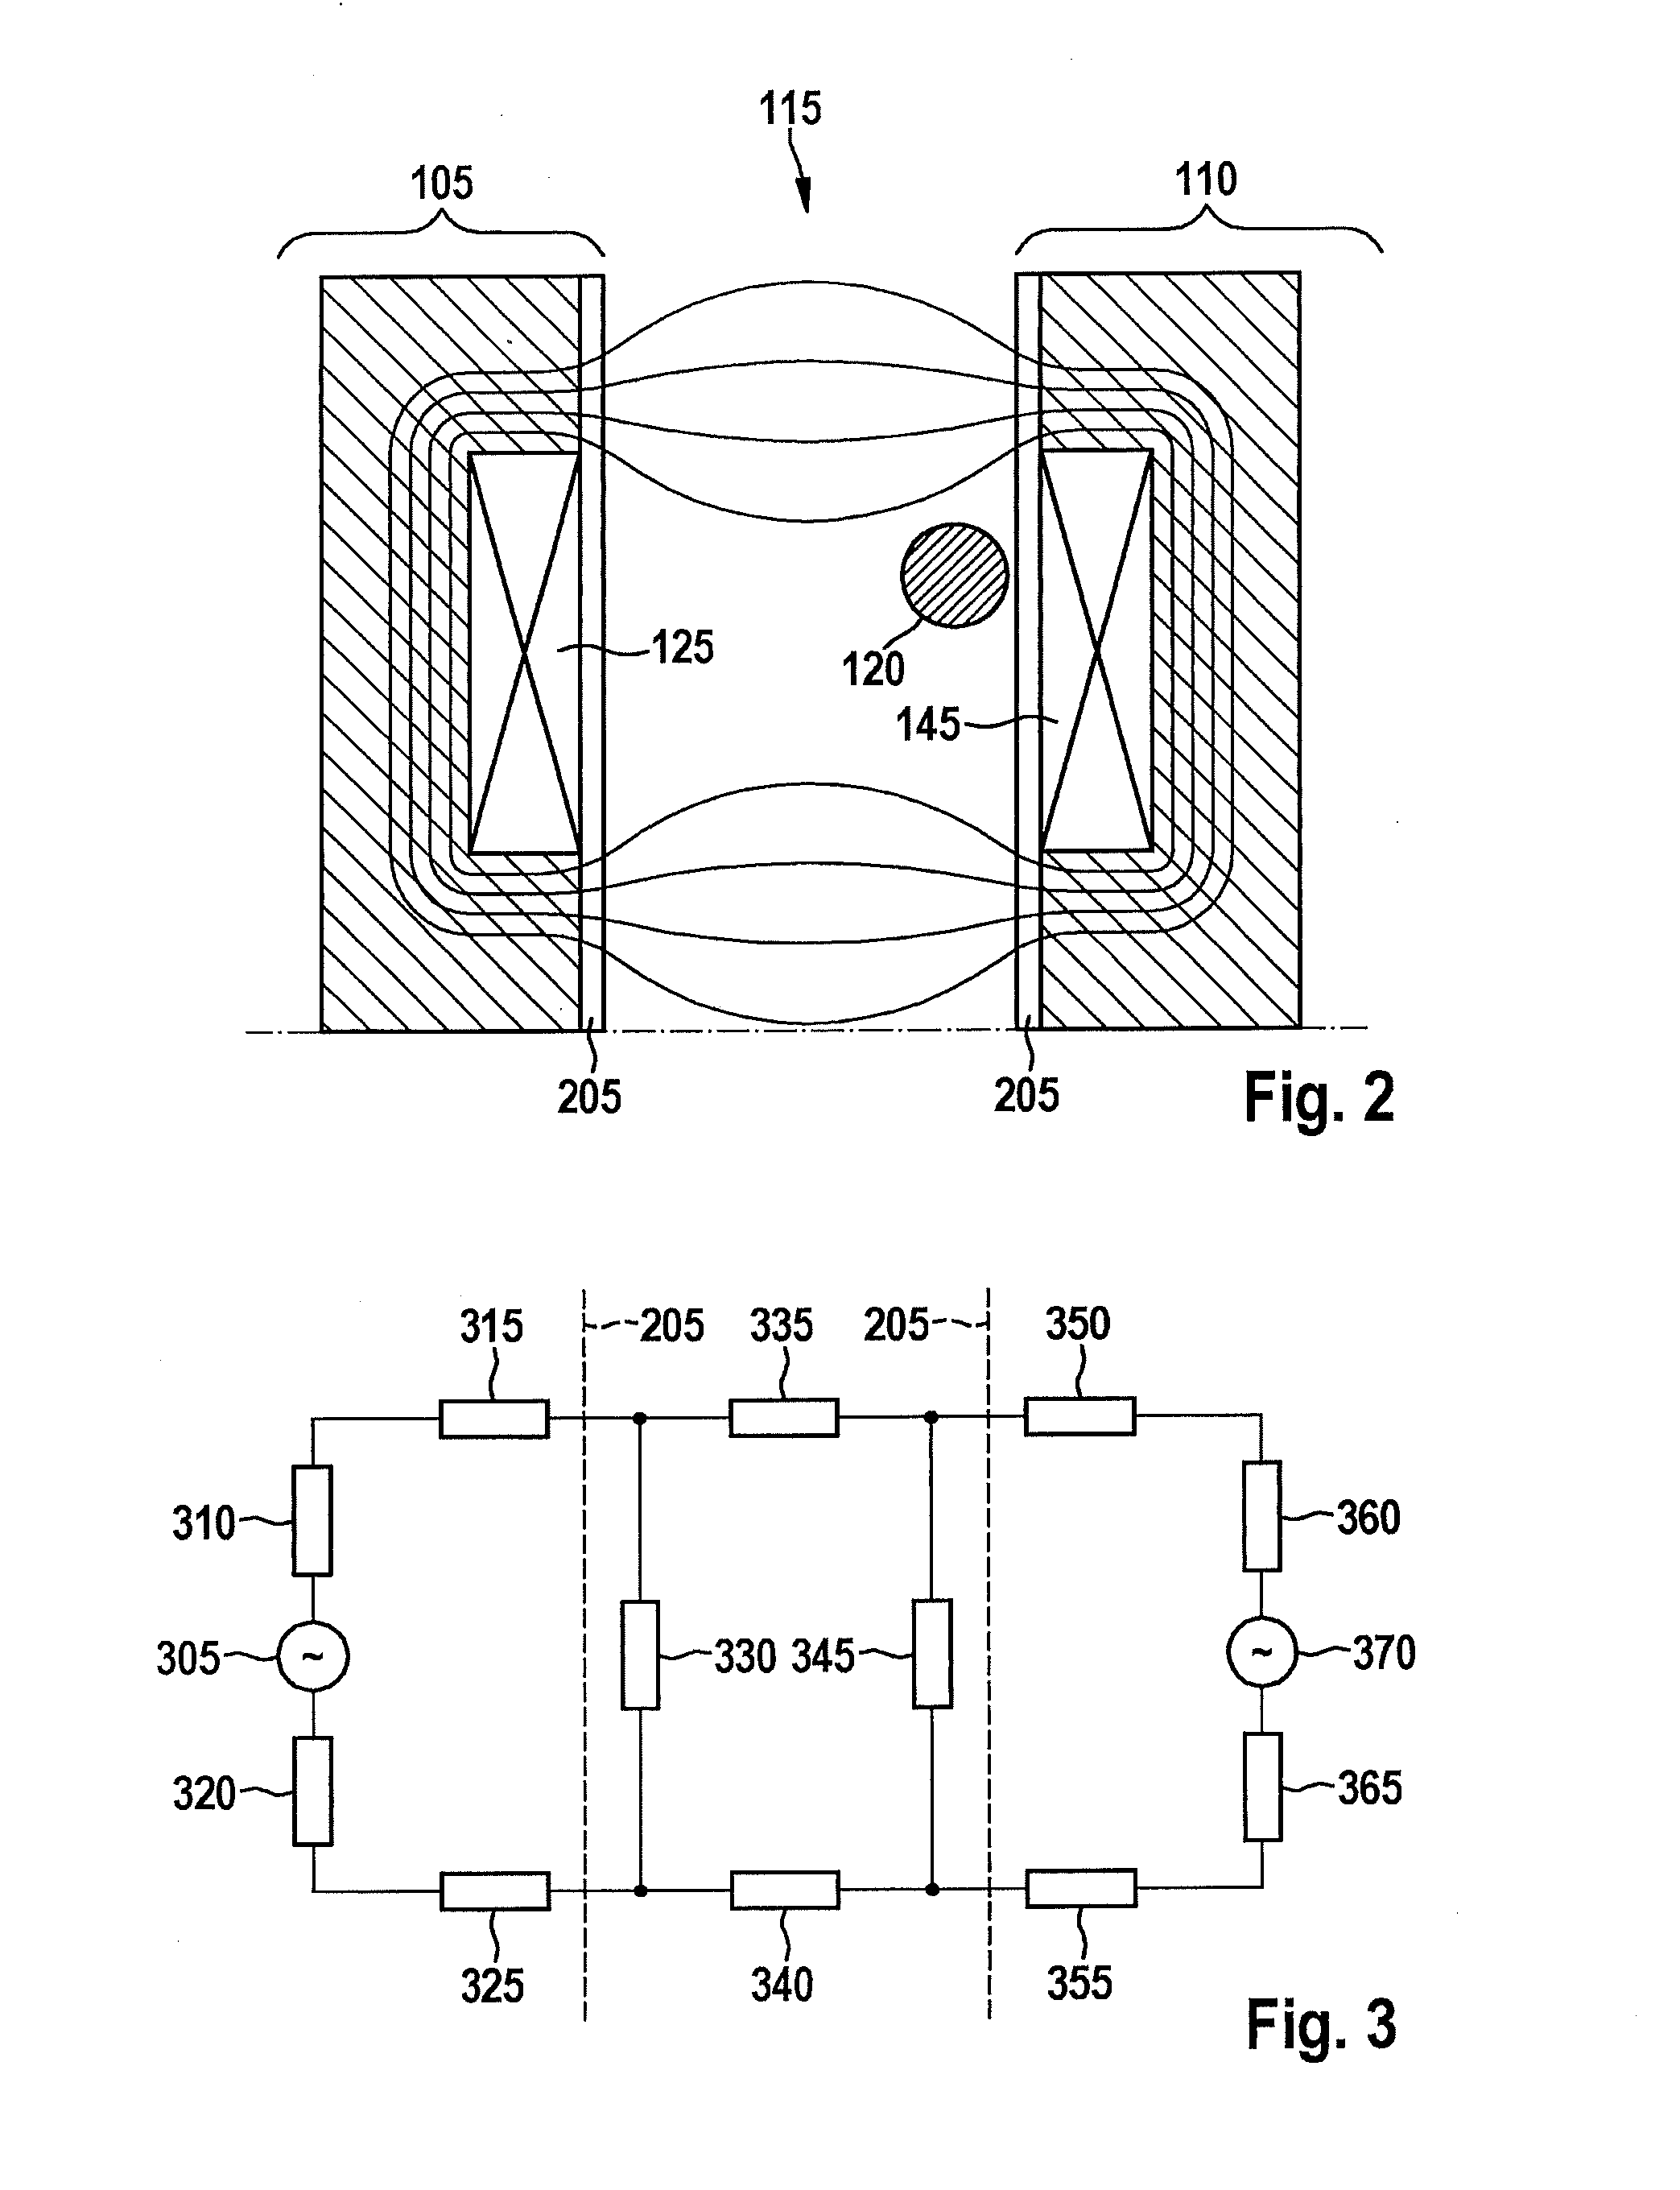 Object detection for a power transfer system